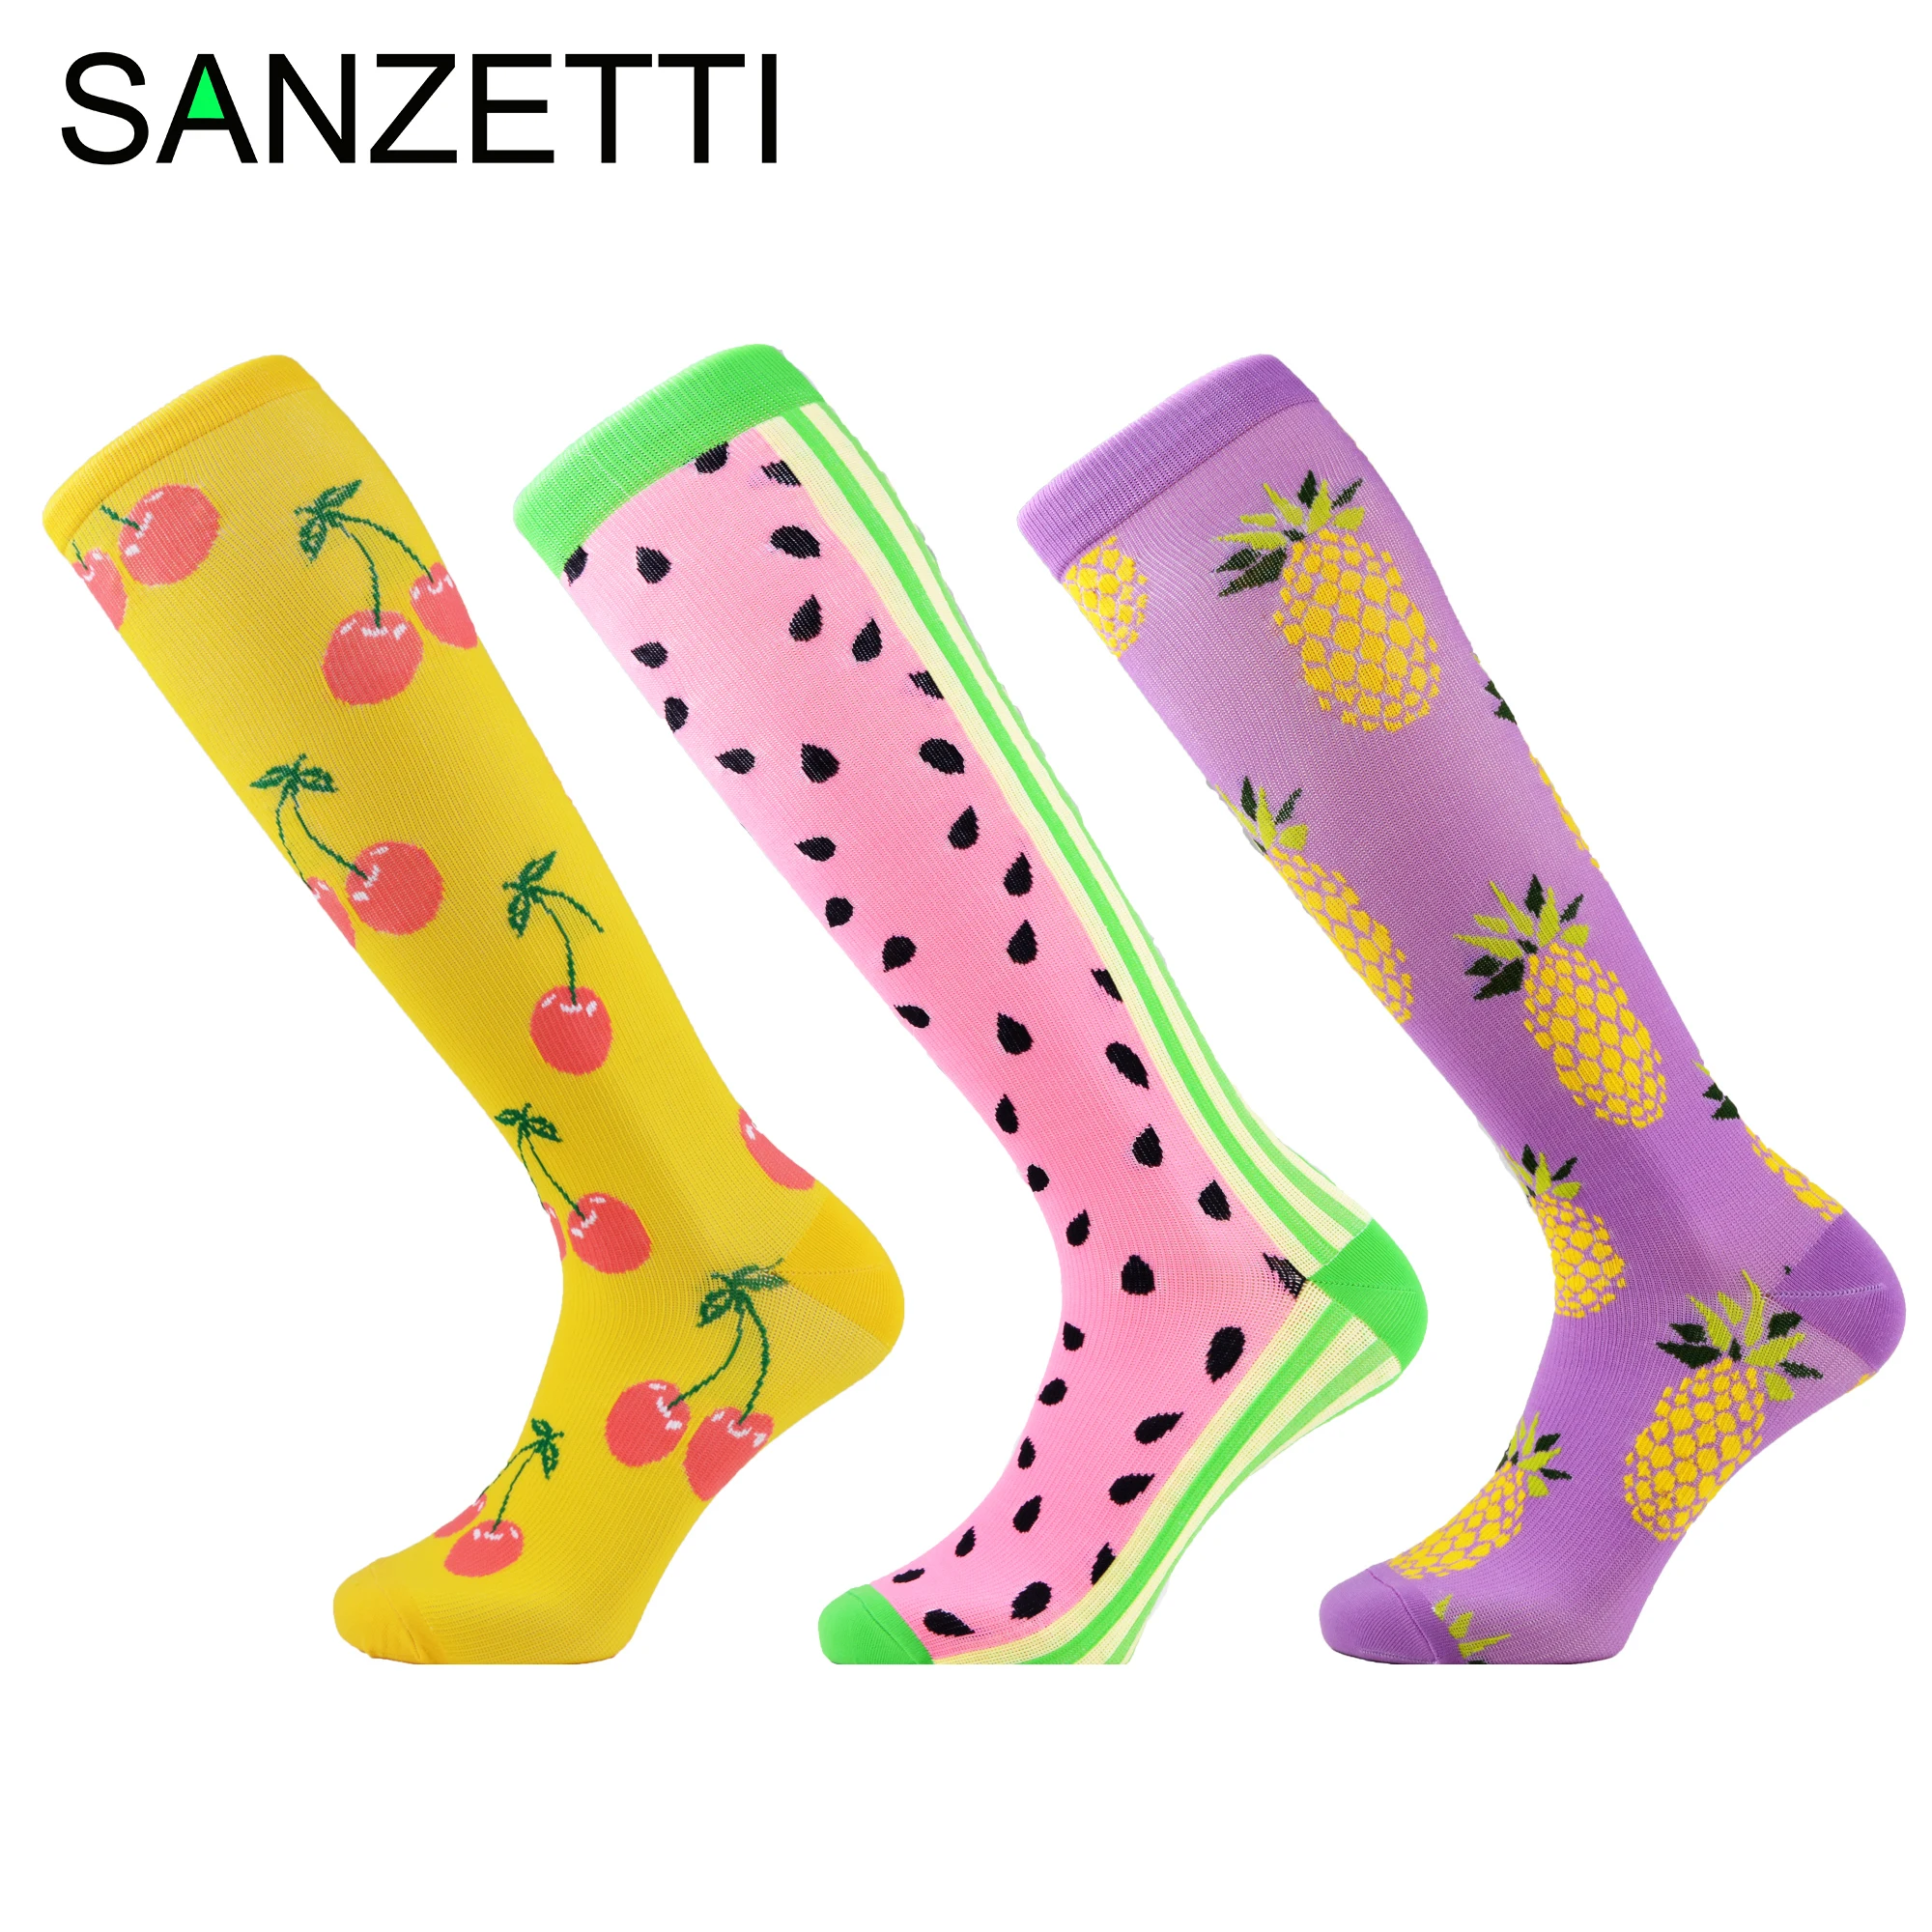 

SANZETTI 3 Pairs/Lot Women's Colorful Leg Support Stretch Combed Cotton Compression Socks Below Knee Anti-Fatigue Happy Socks